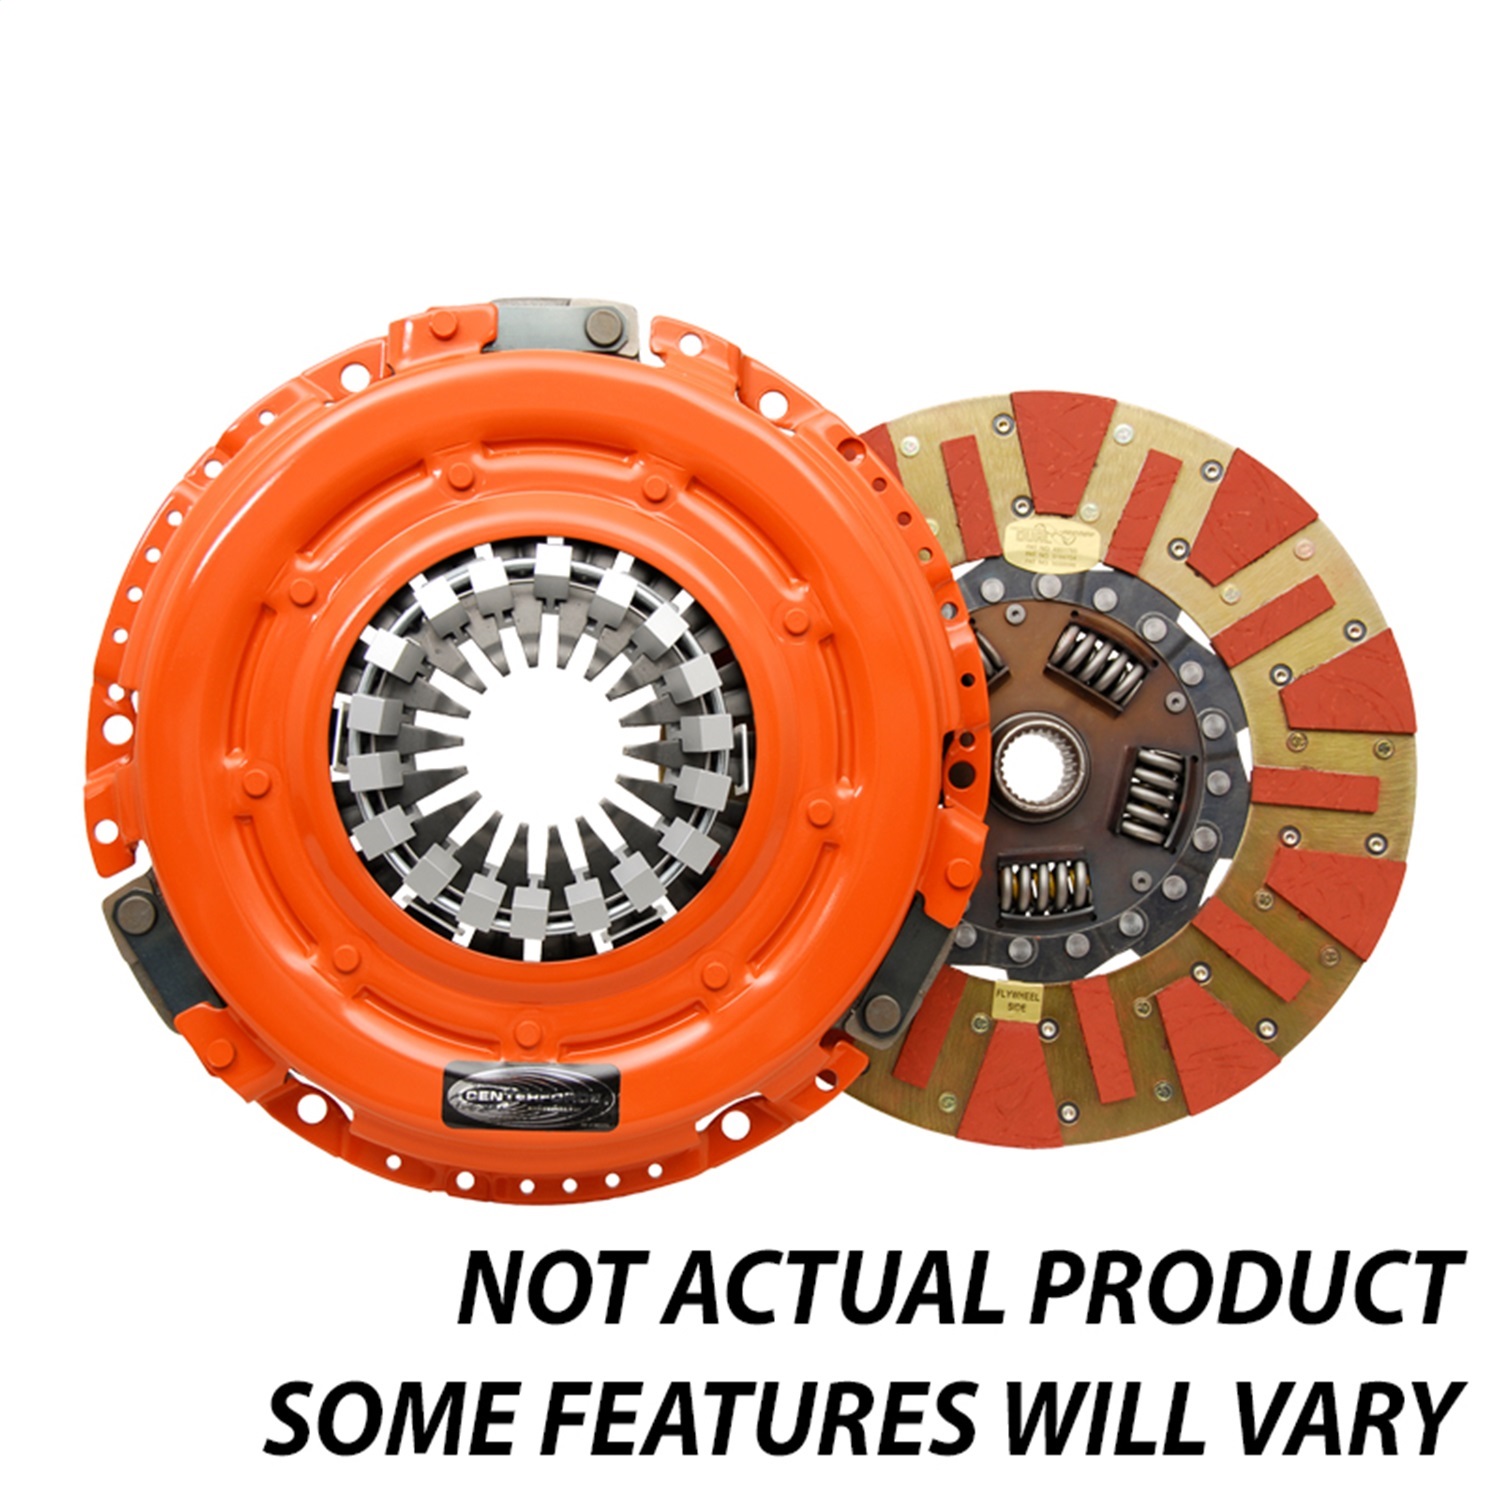 Centerforce Centerforce DF148552 Dual Friction Clutch Pressure Plate And Disc Set